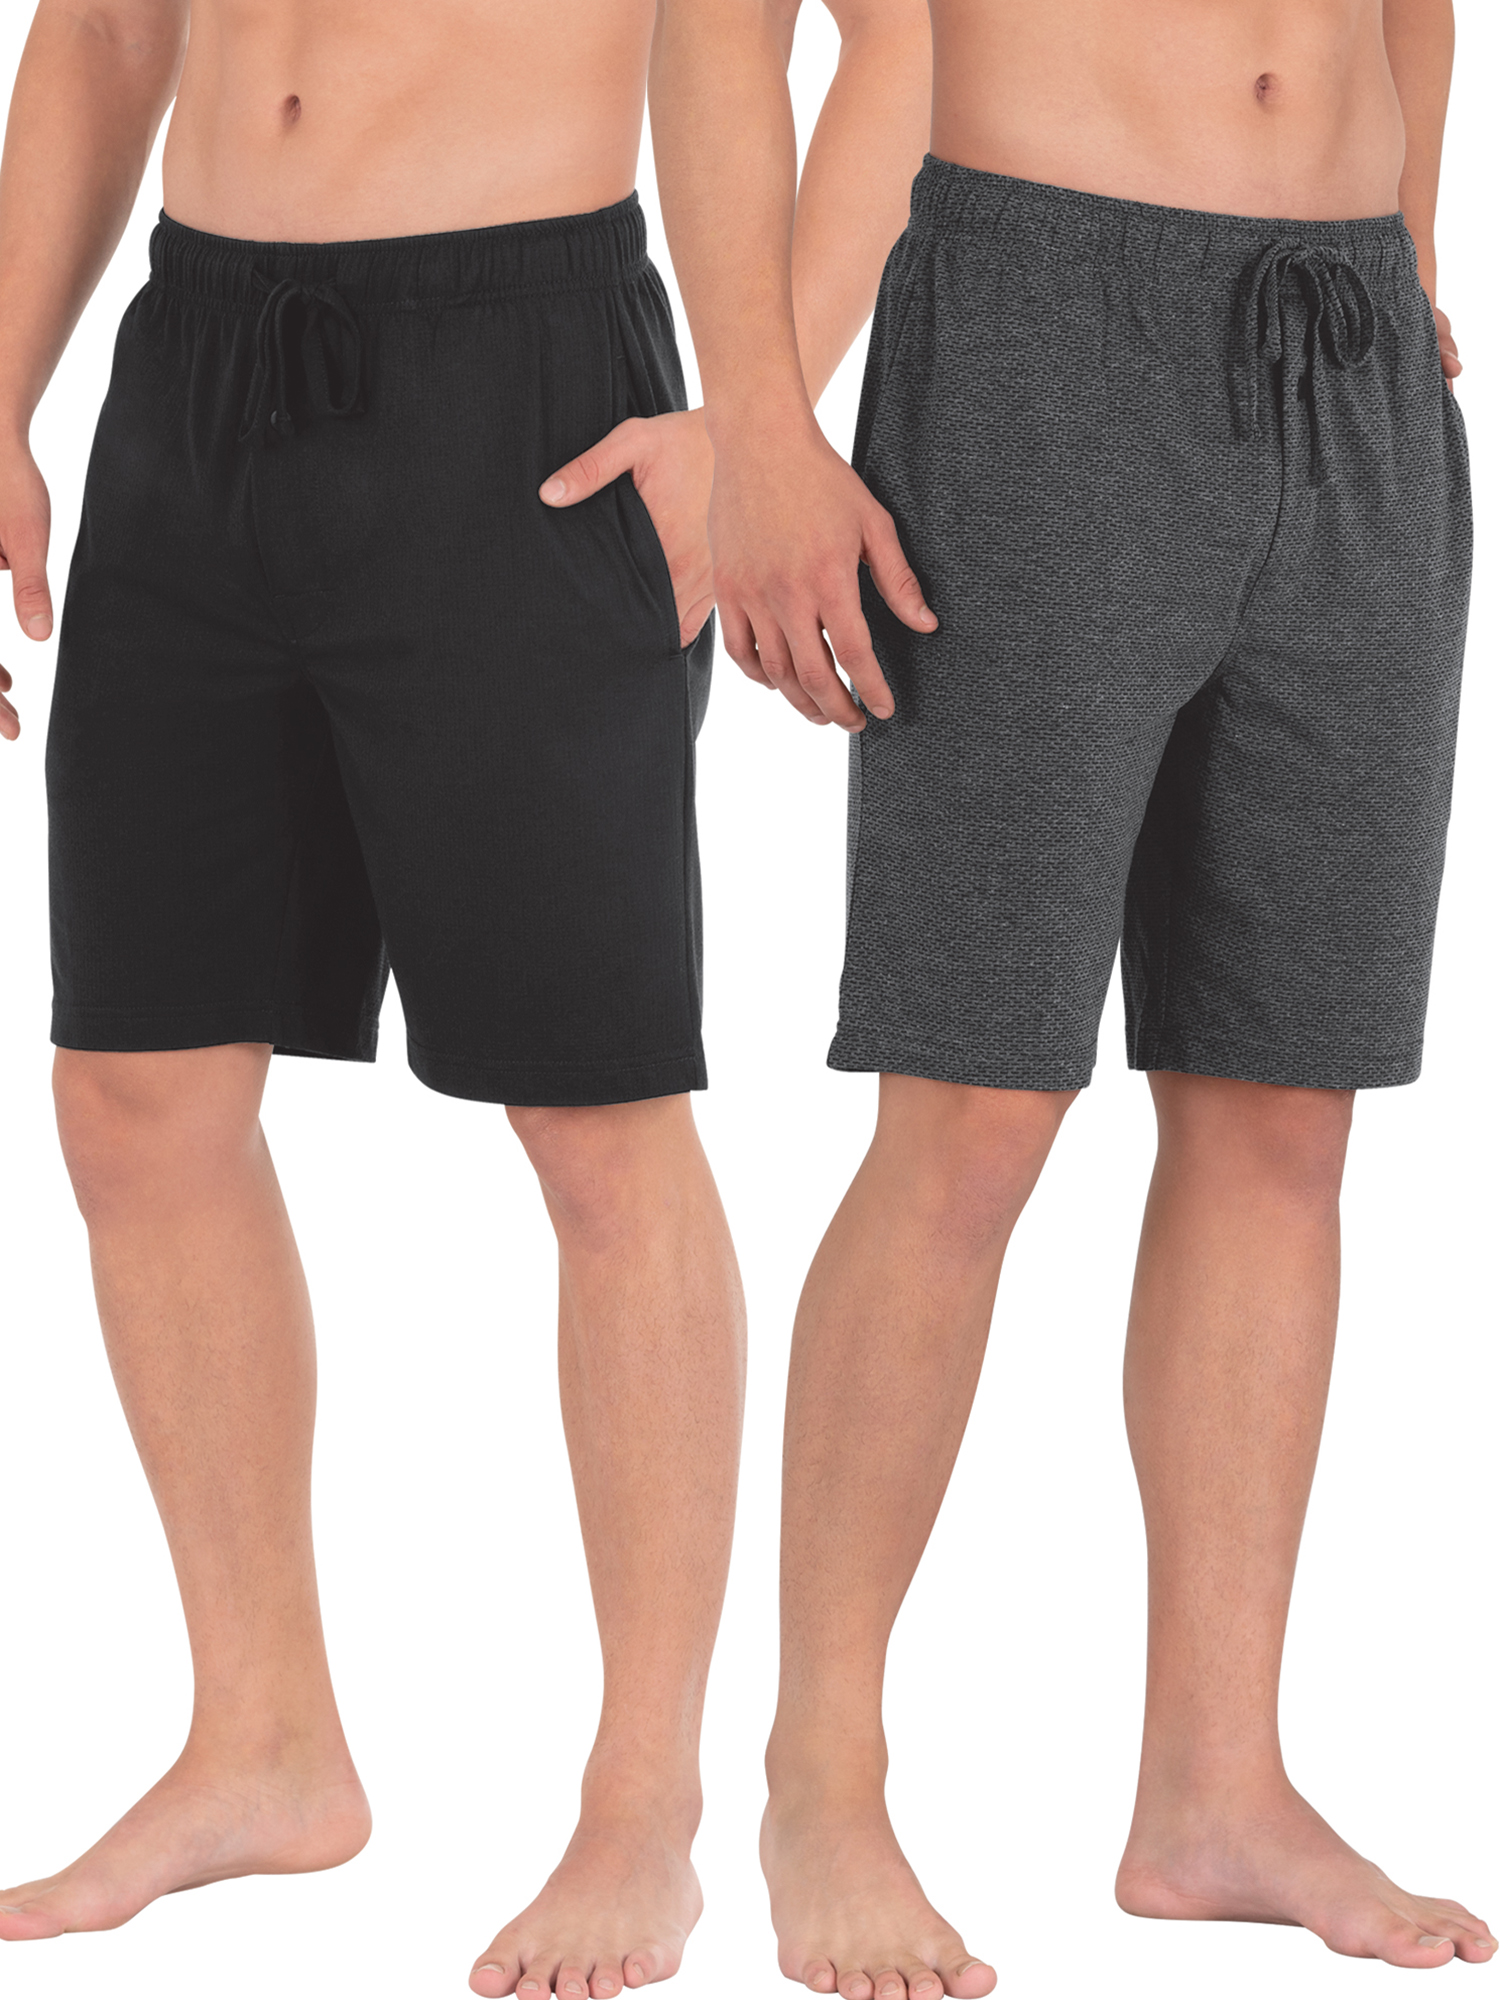 Fruit of the Loom Men's and Big Men’s Breathable Mesh 2-Pack Knit Sleep Pajama Short, S-5XL - image 1 of 6